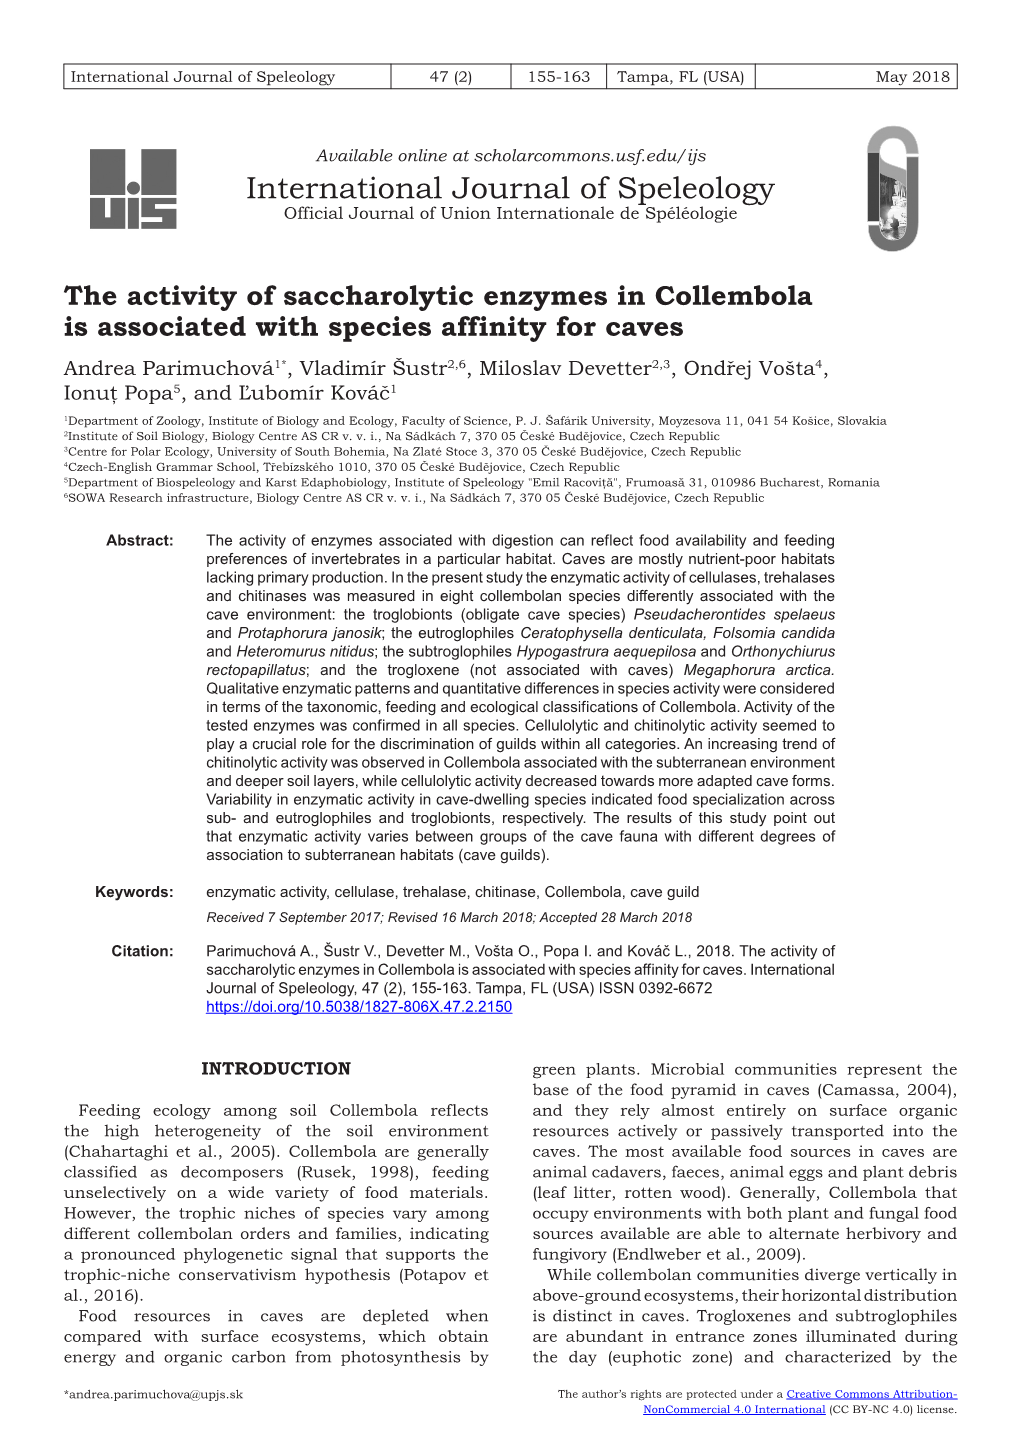 The Activity of Saccharolytic Enzymes in Collembola Is Associated With